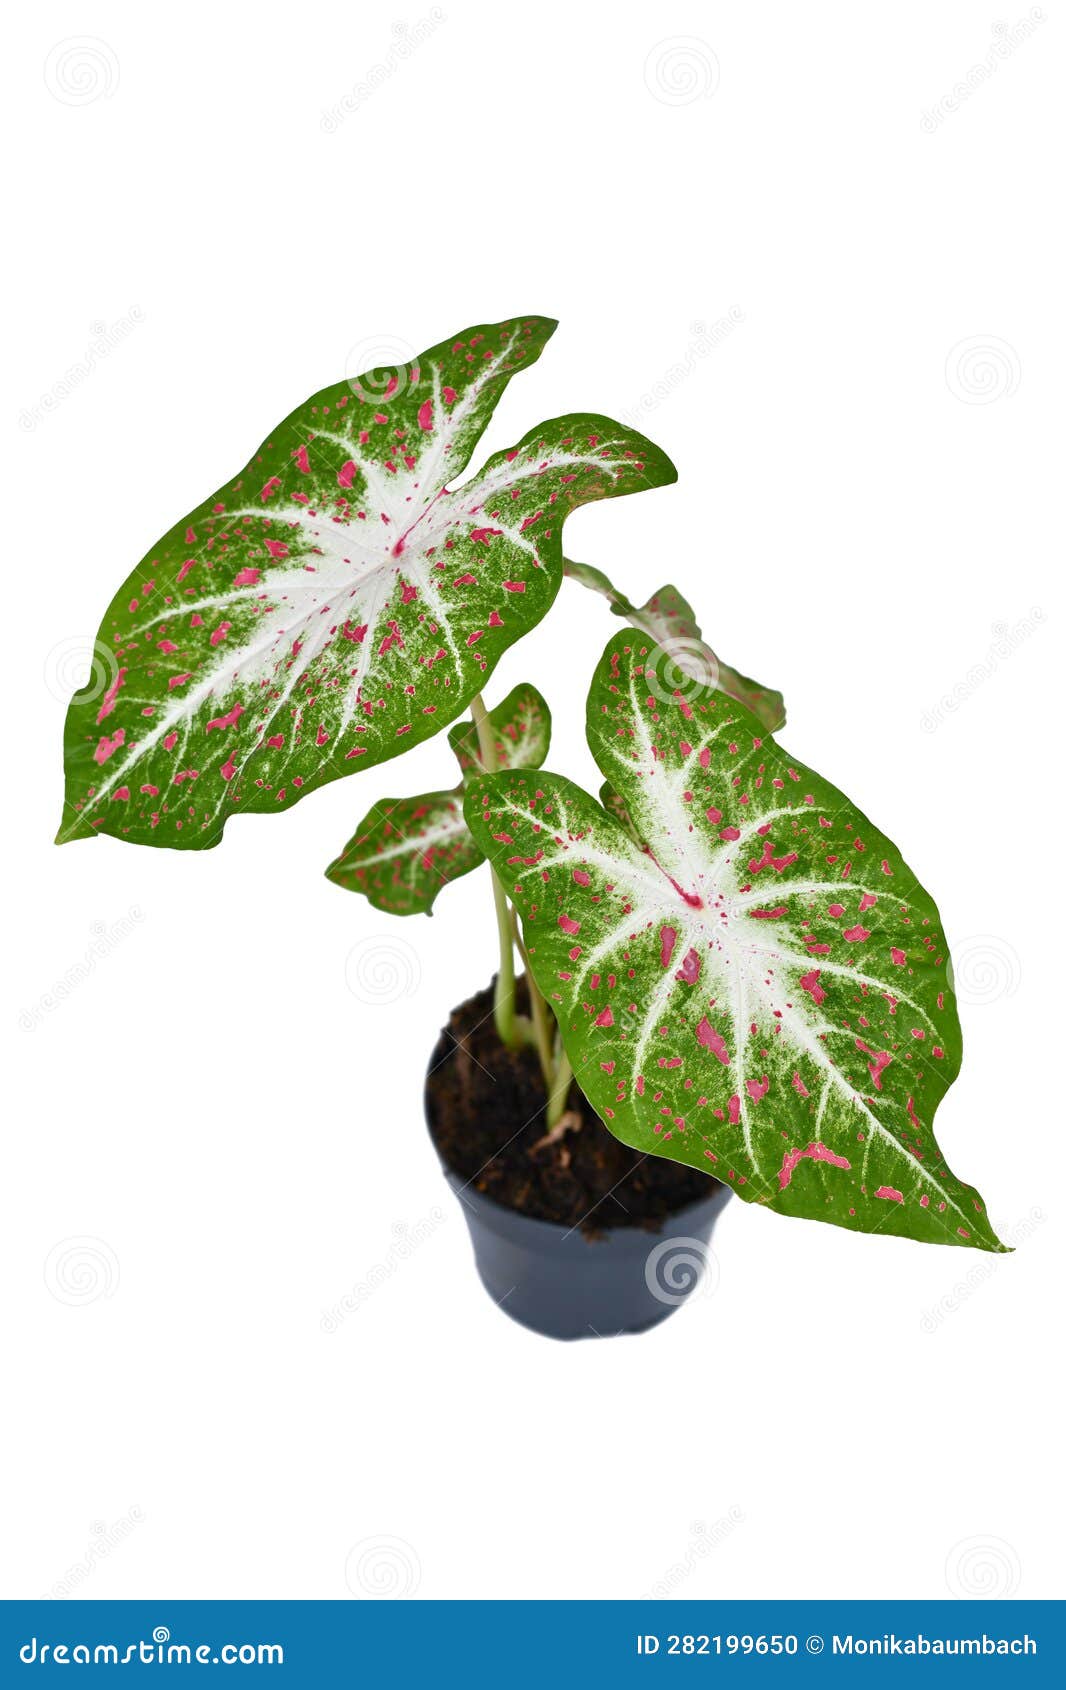 Exotic Caladium Hearts Desire Houseplant with Bright Red Leaves in Pot ...